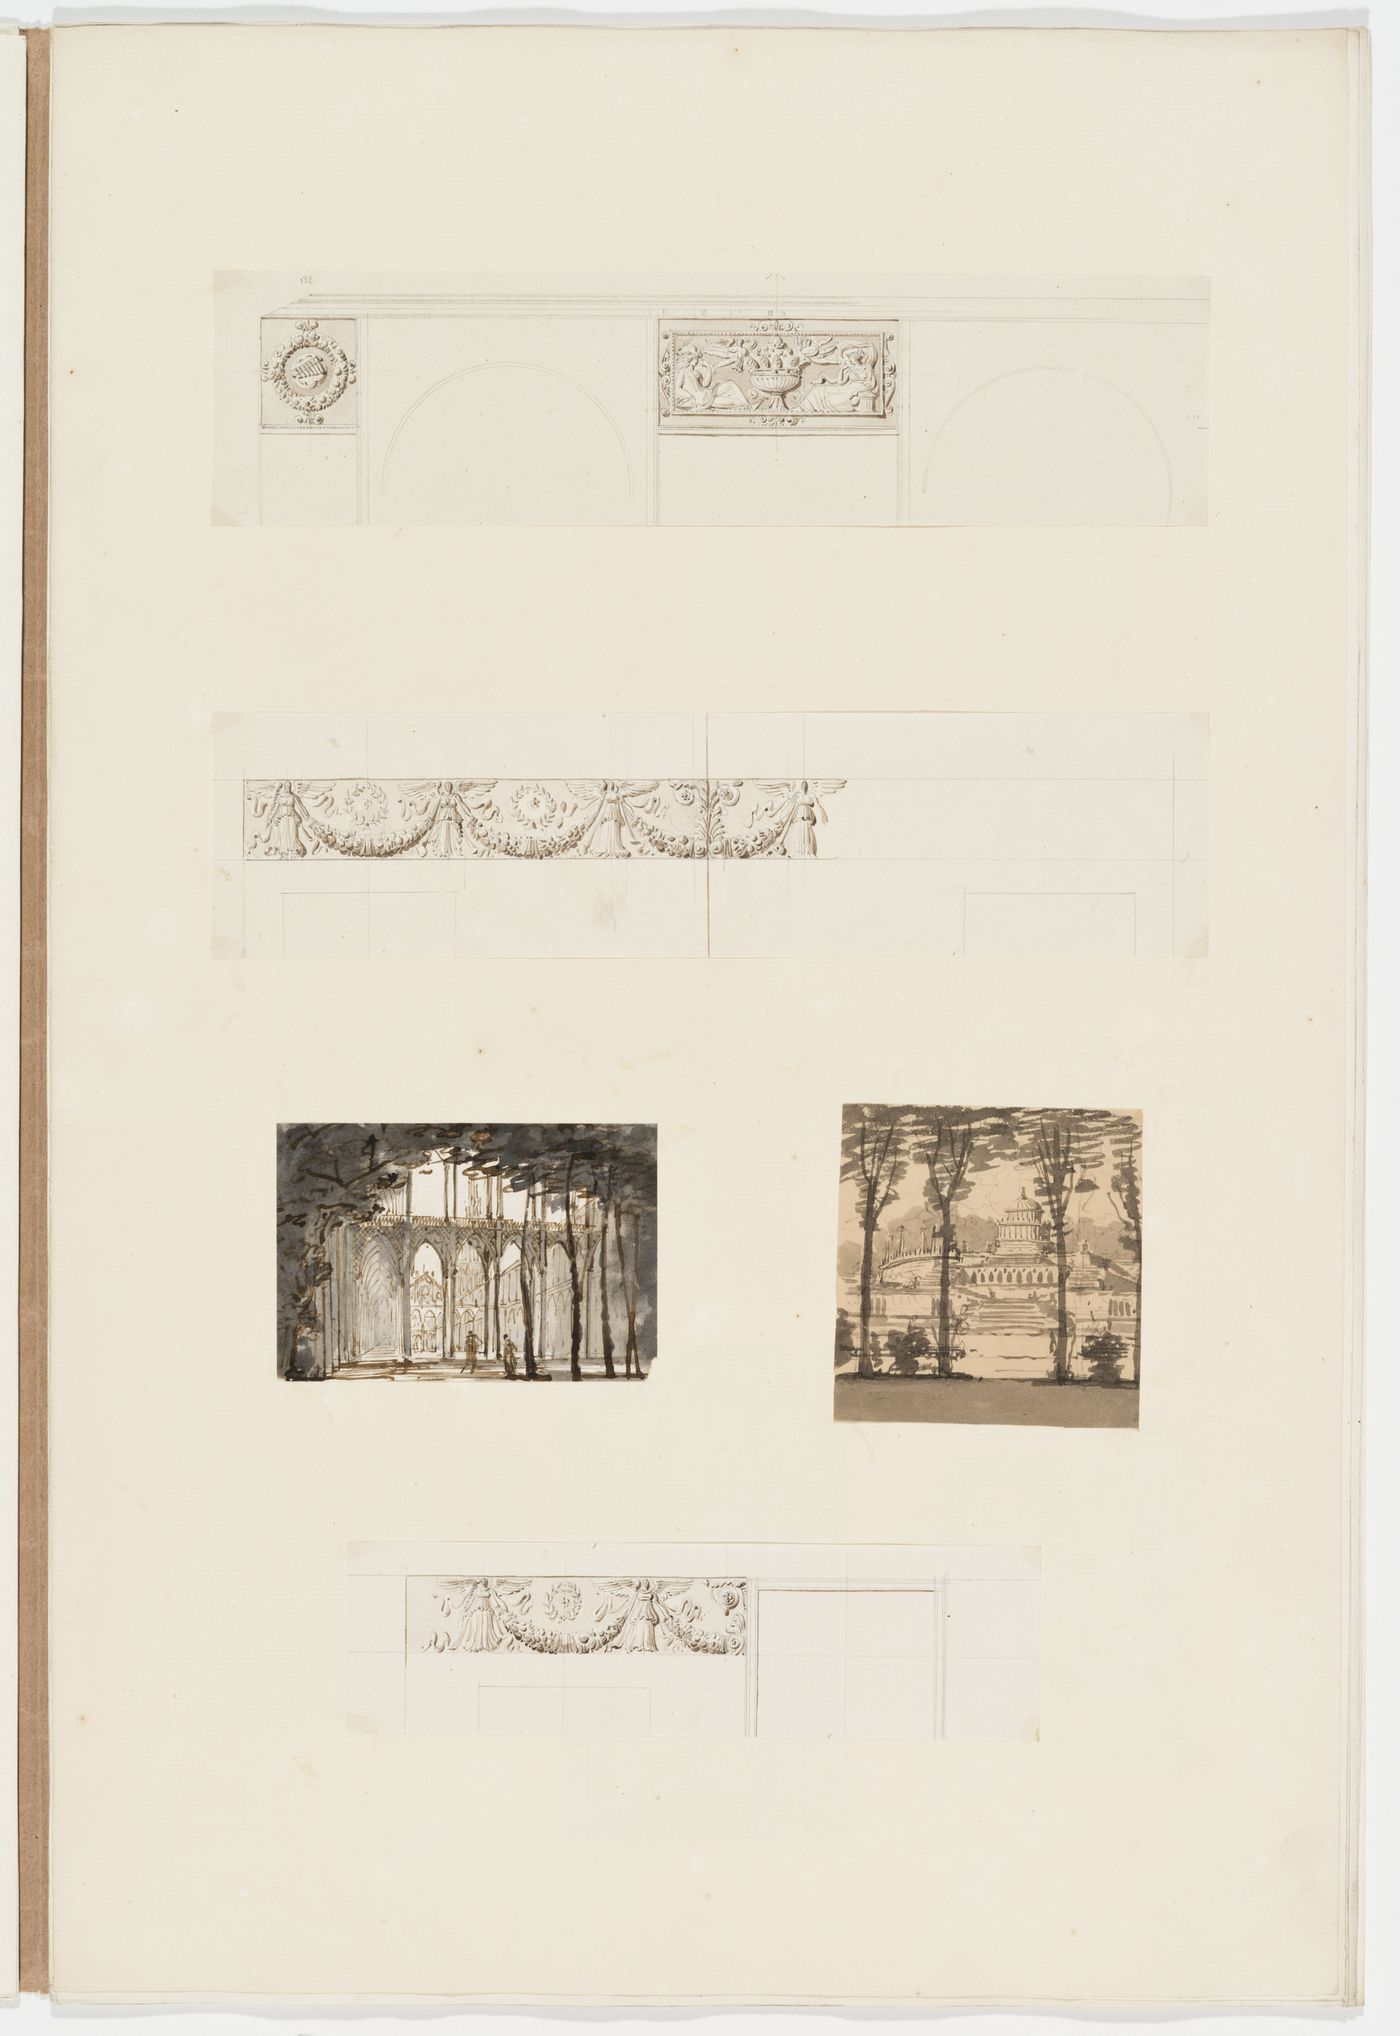 Three elevations of ornament panels and friezes with a festoon and vases; Two unidentified views